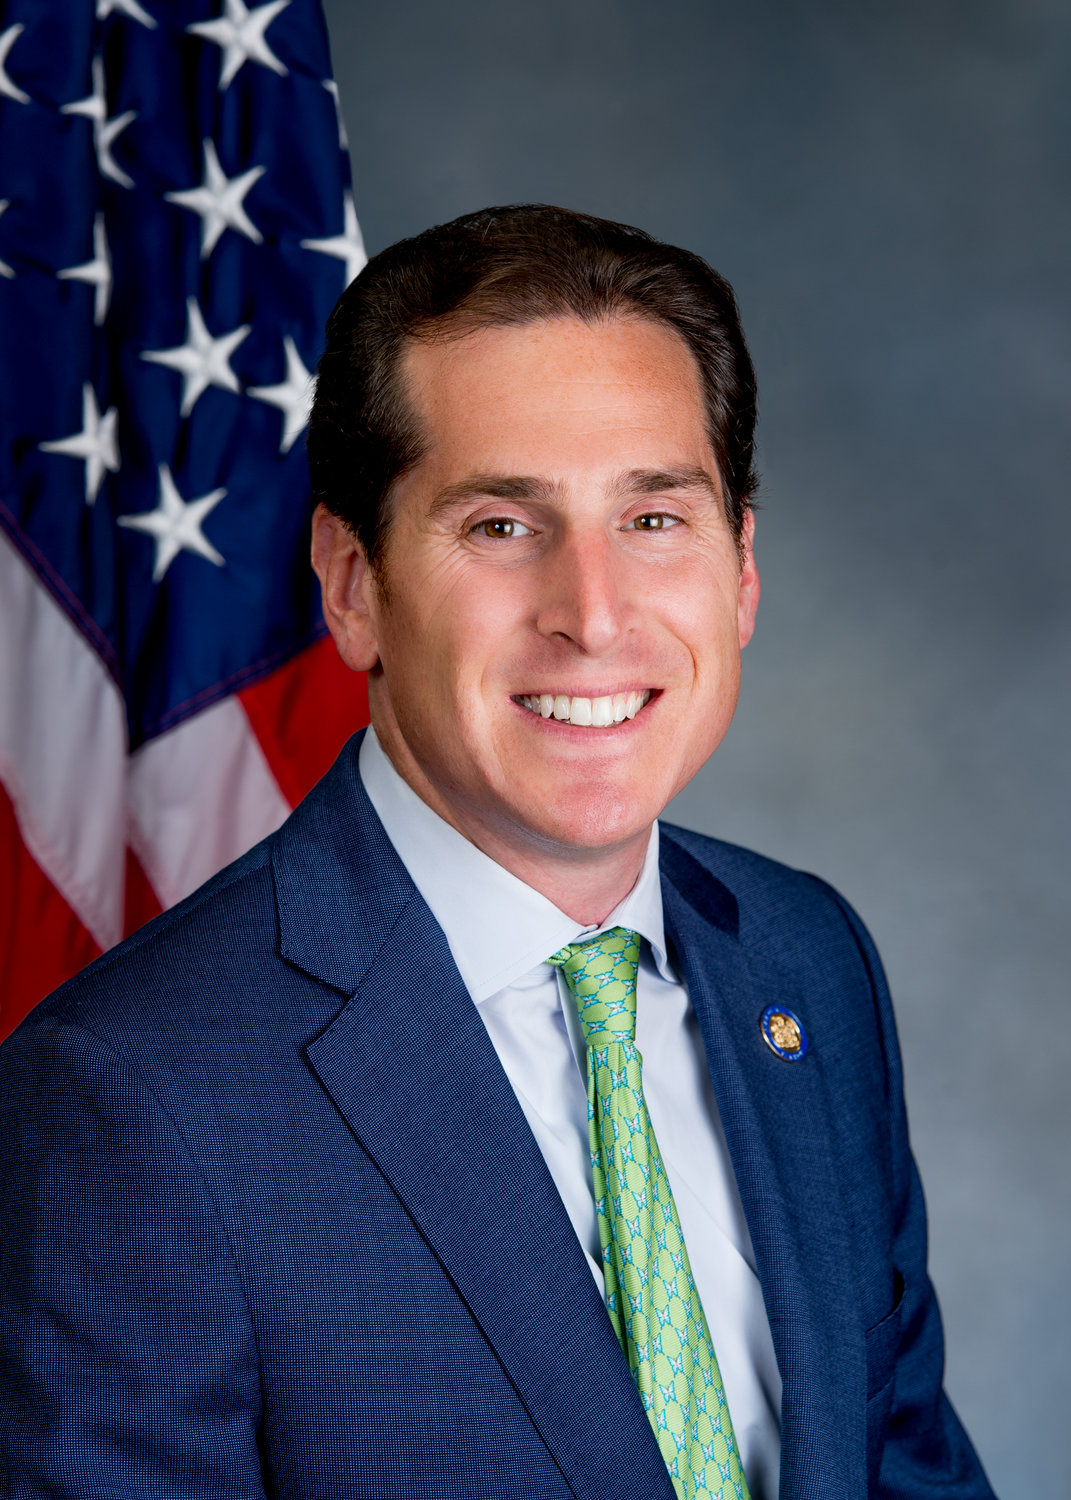 State Sen. Todd Kaminsky is urging the Army Corps to dredge the Jones Inet to make it safer for boaters this summer.